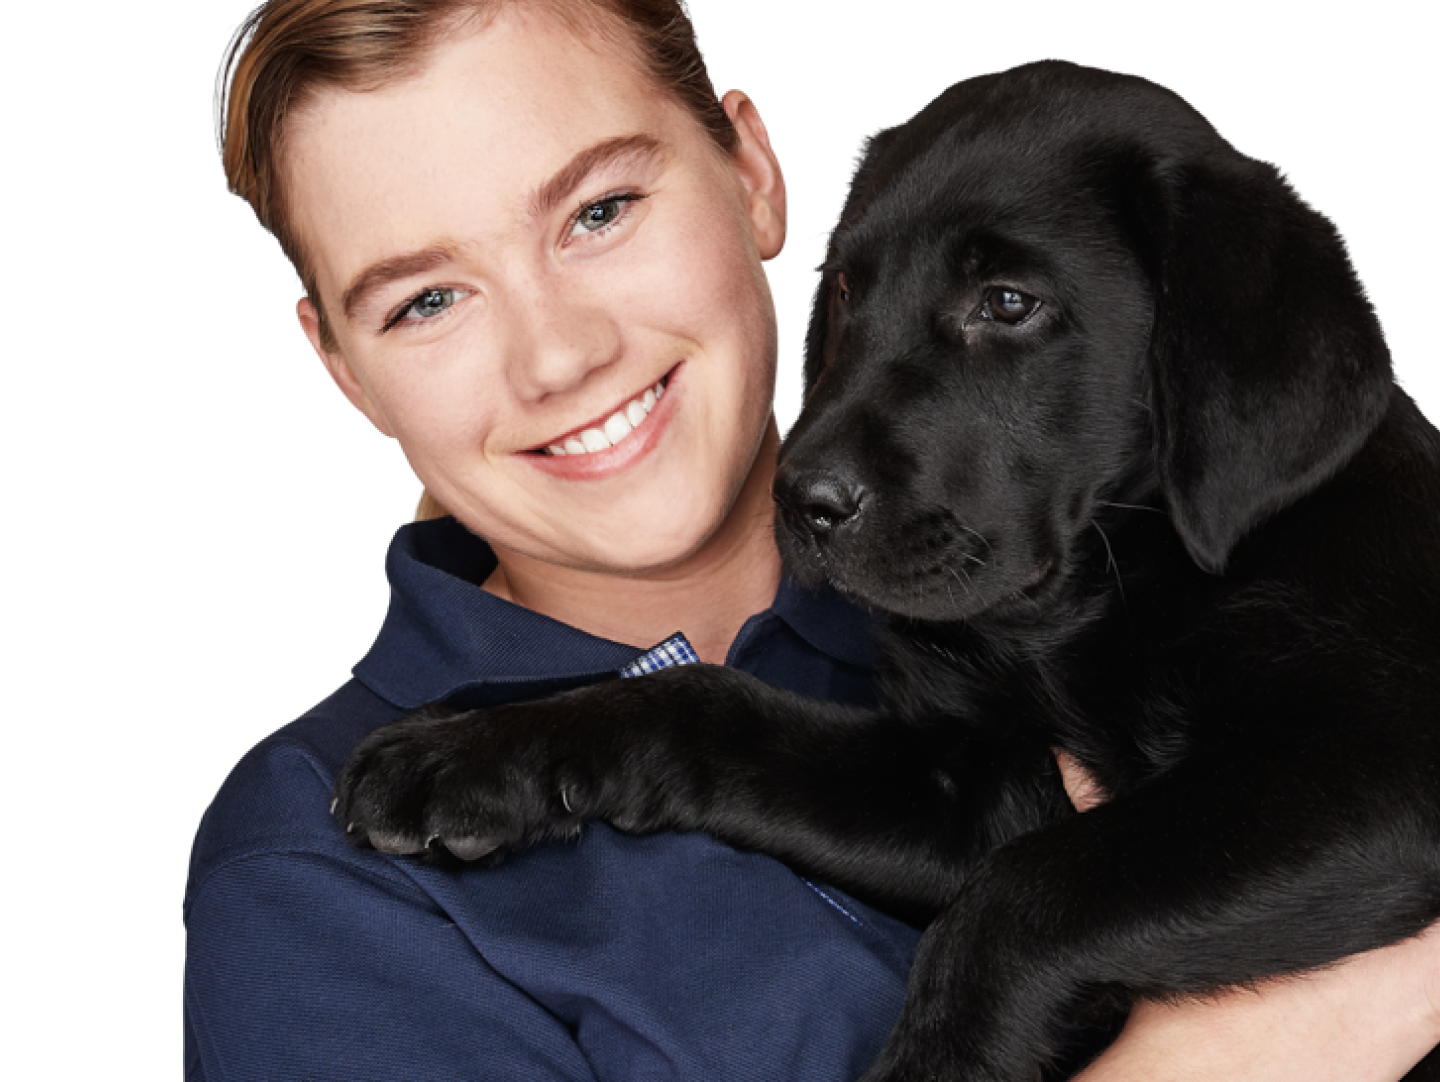 Vision Australia staff member holds a seeing eye dog puppy in her arms